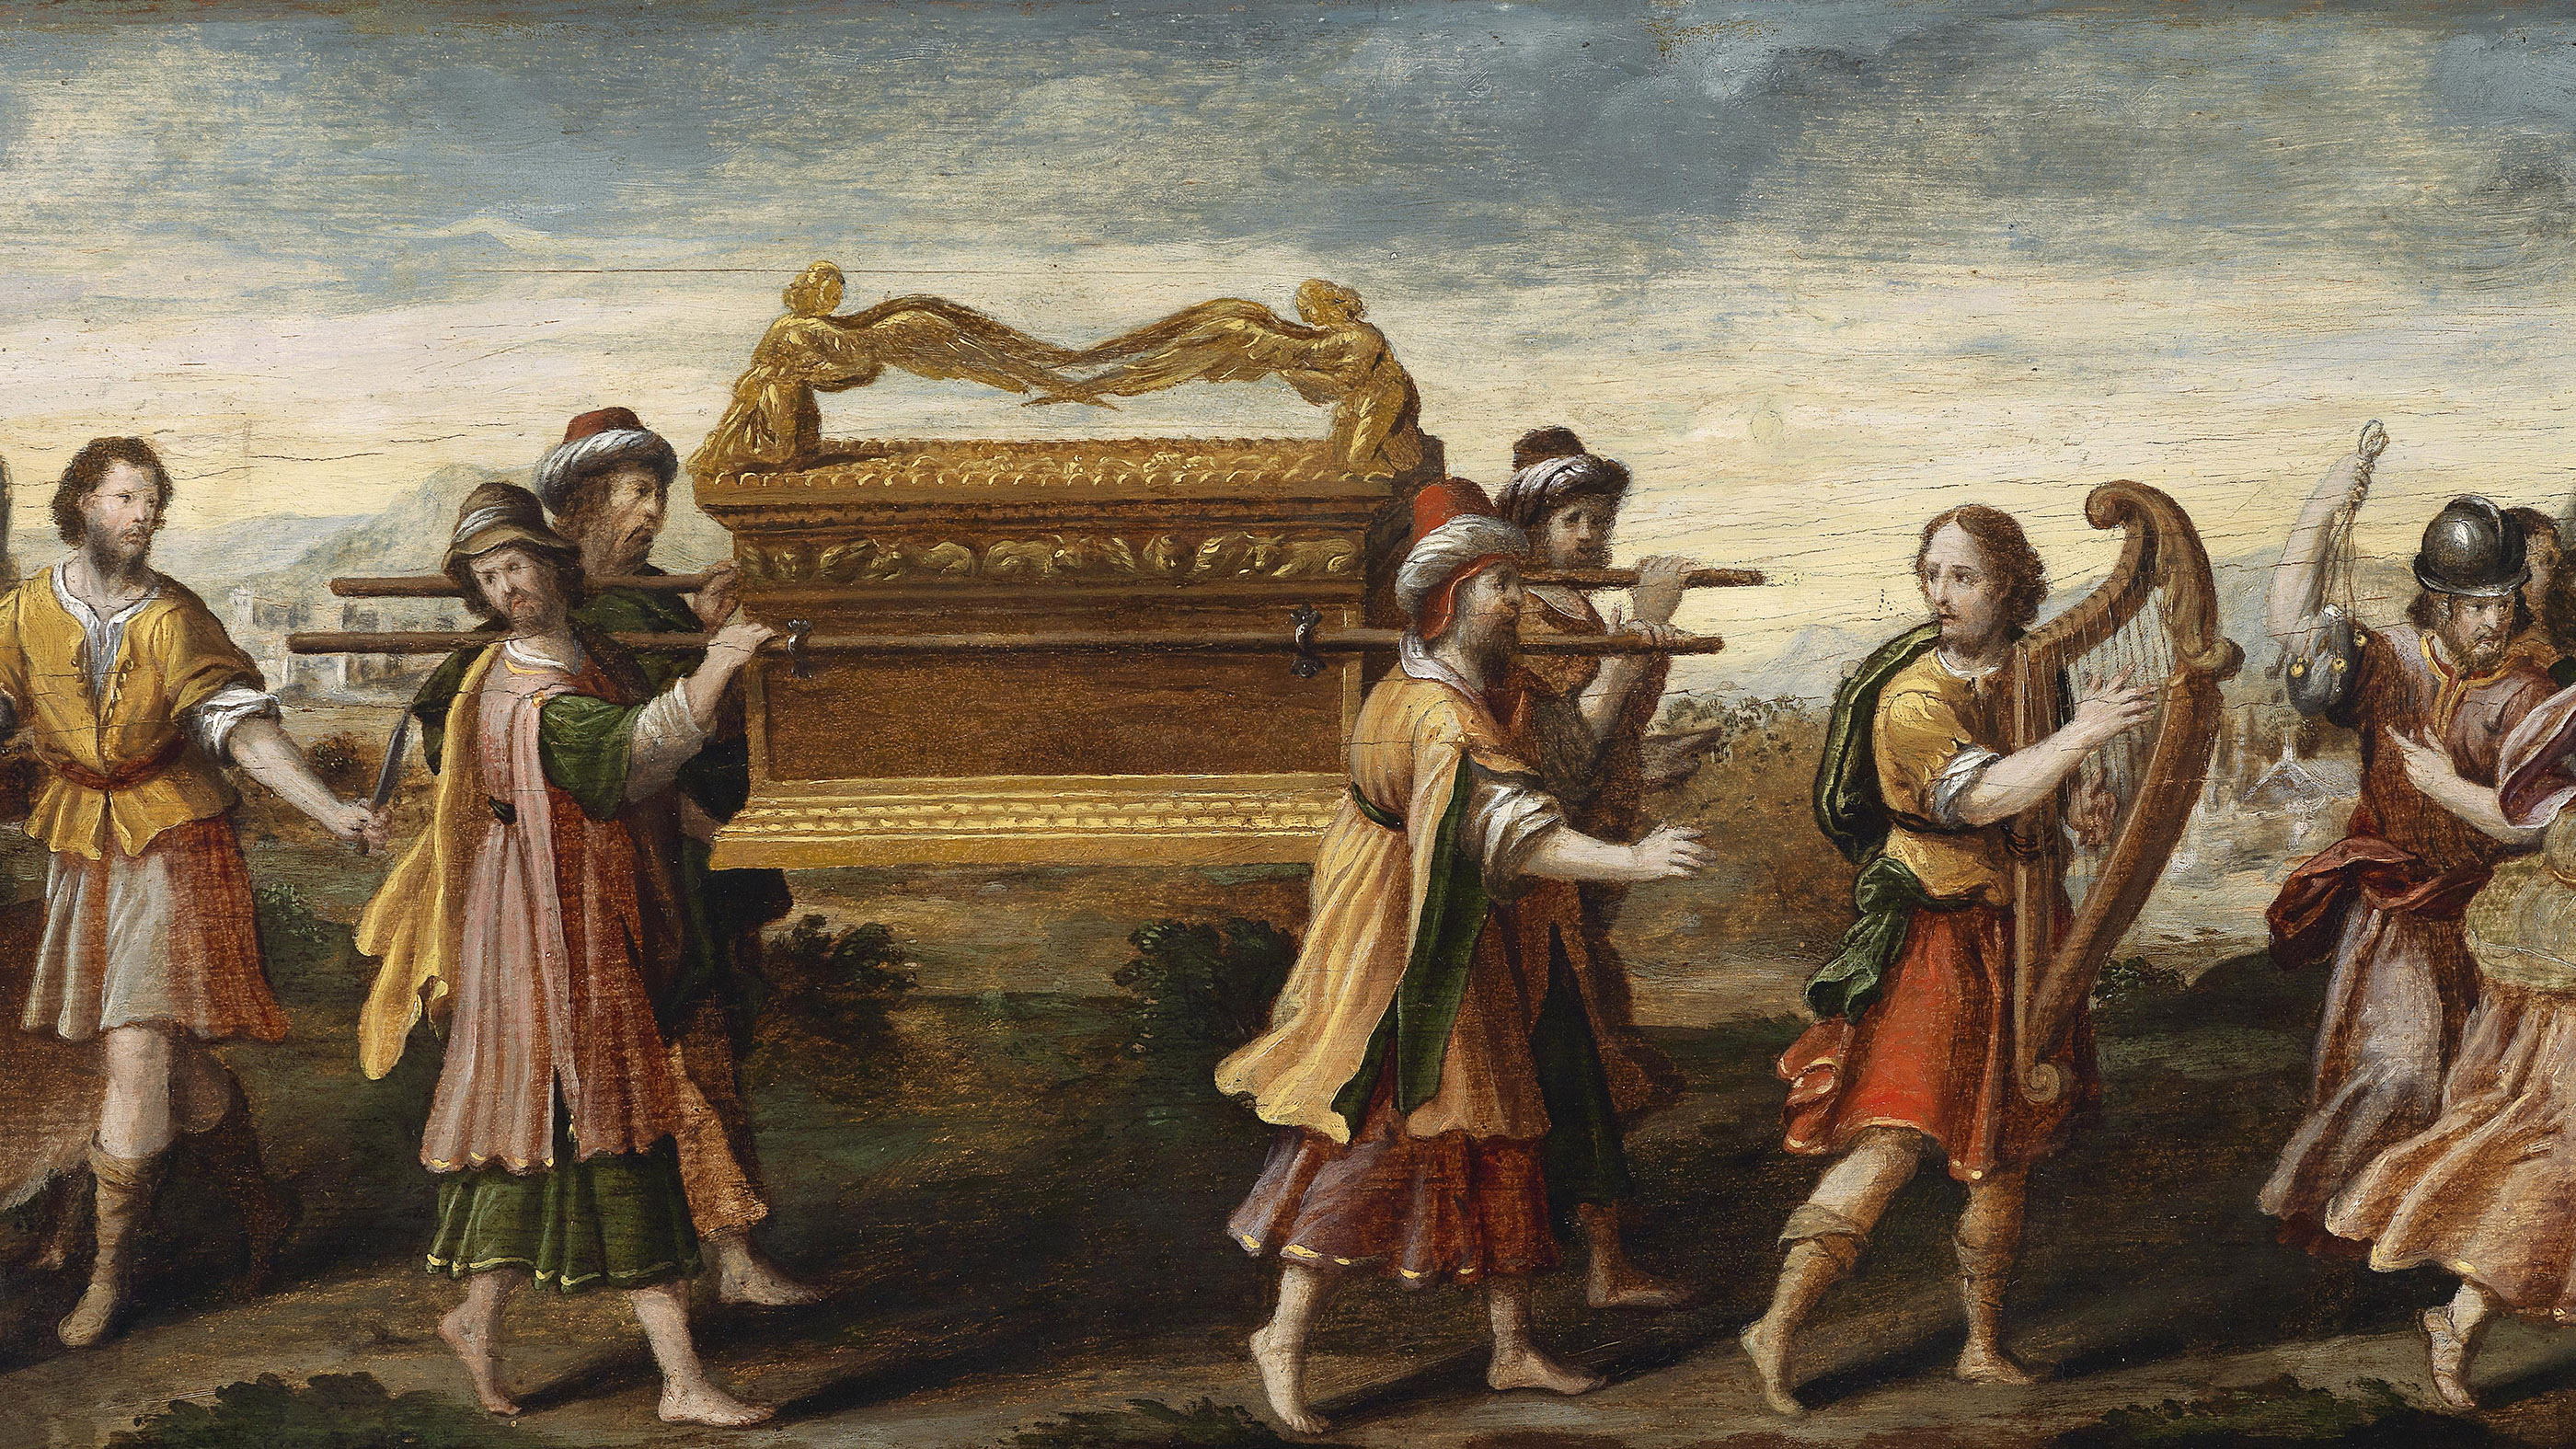 King David bearing the Ark of the Covenant into Jerusalem, in the early 16th century.